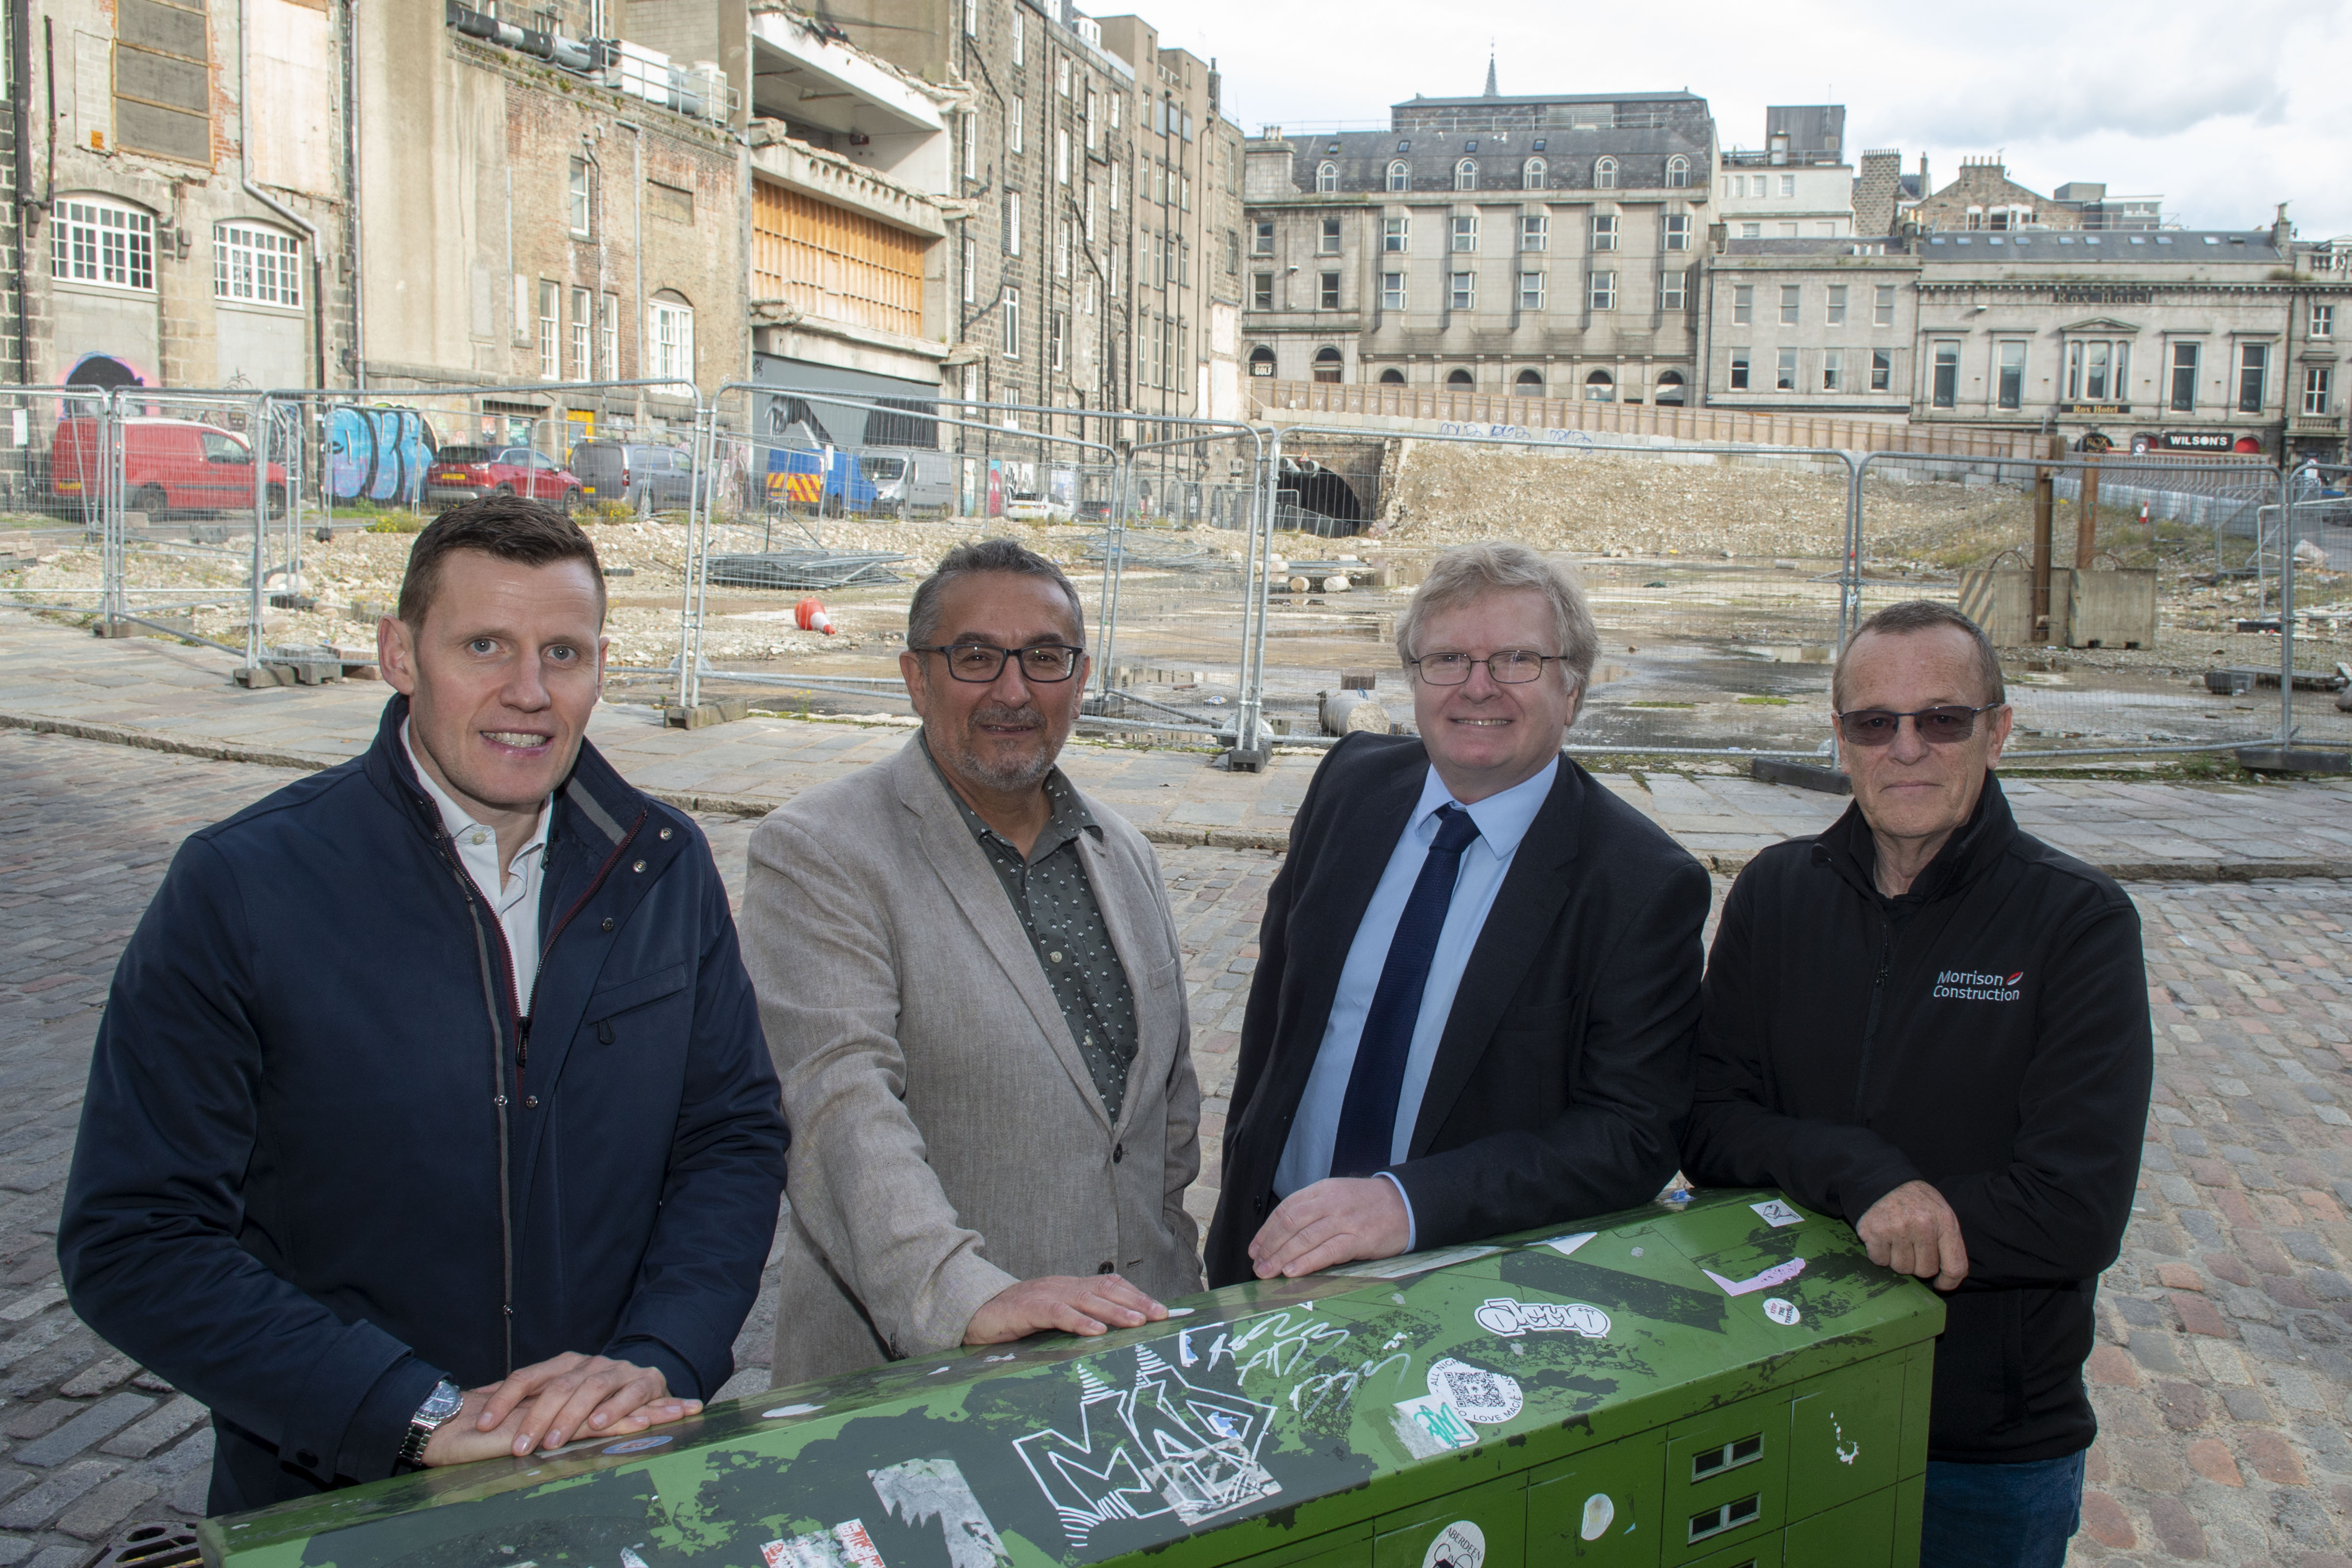 Morrison Construction named main contractor for Aberdeen's new market site